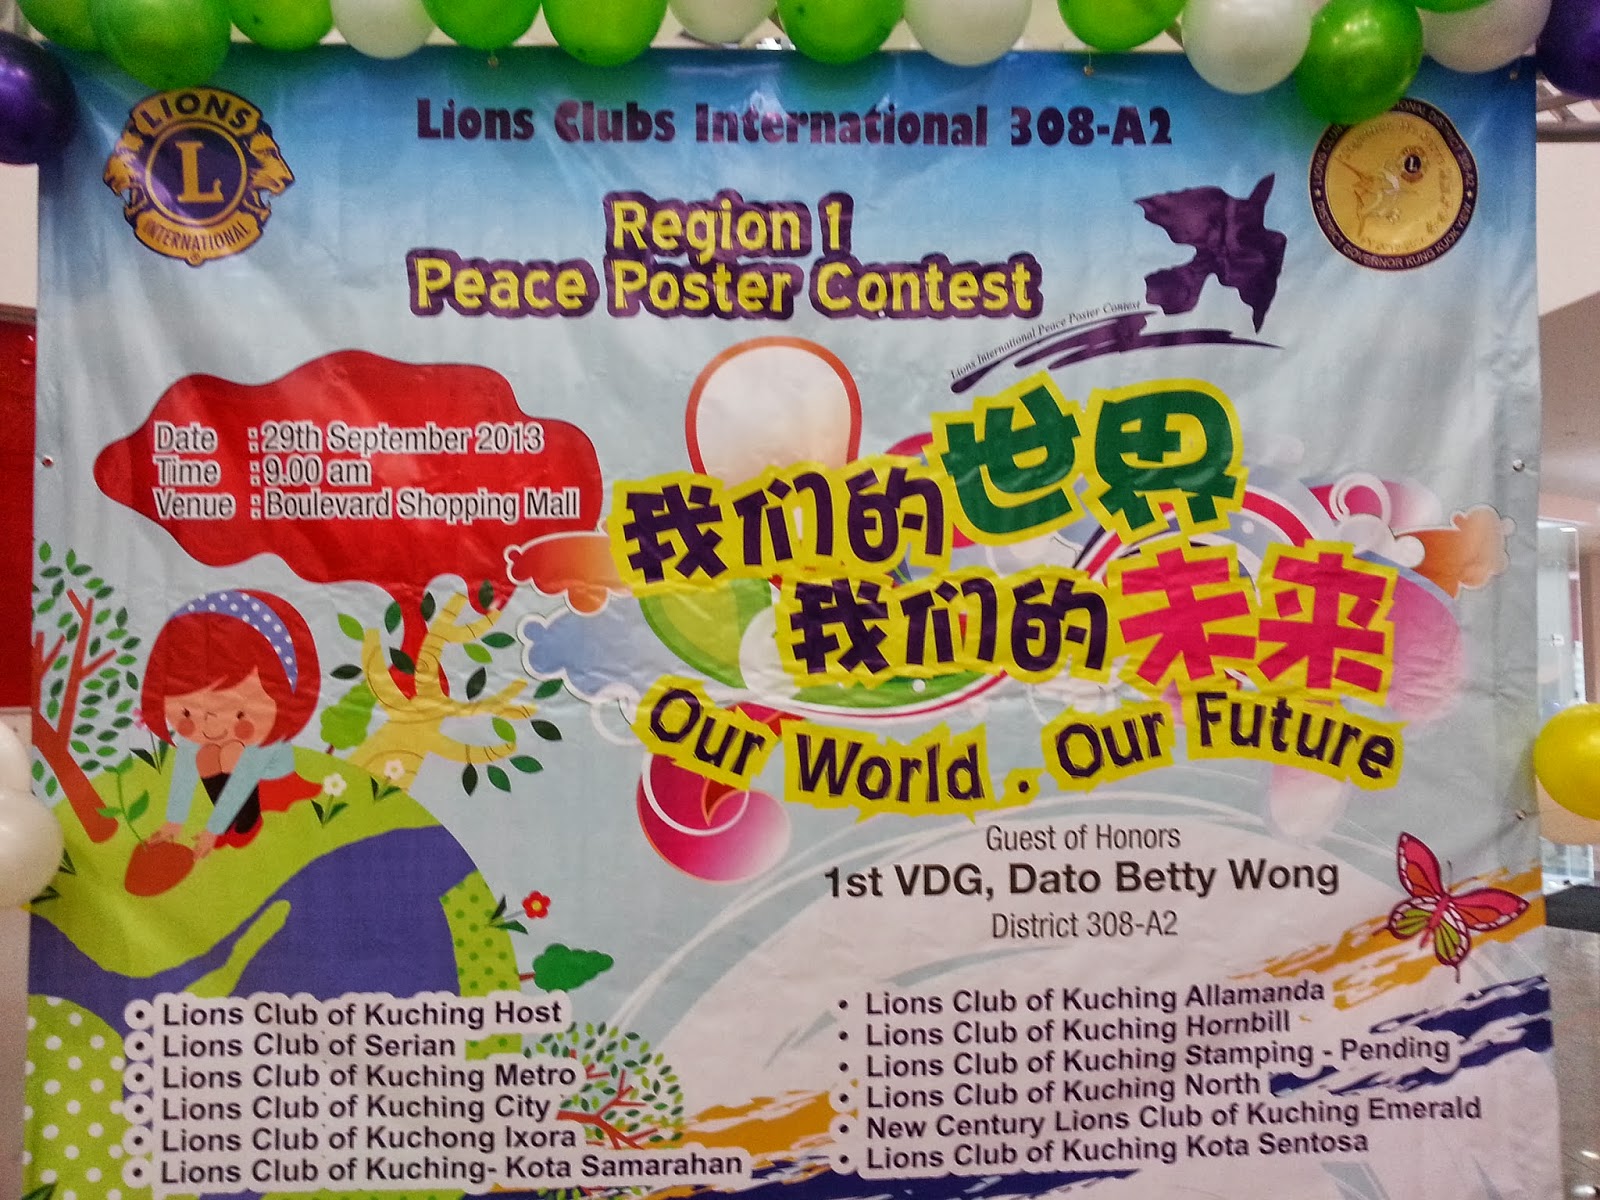 Lions Club of Kuching City's E-Bulletin: Region 1 Peace Poster Contest